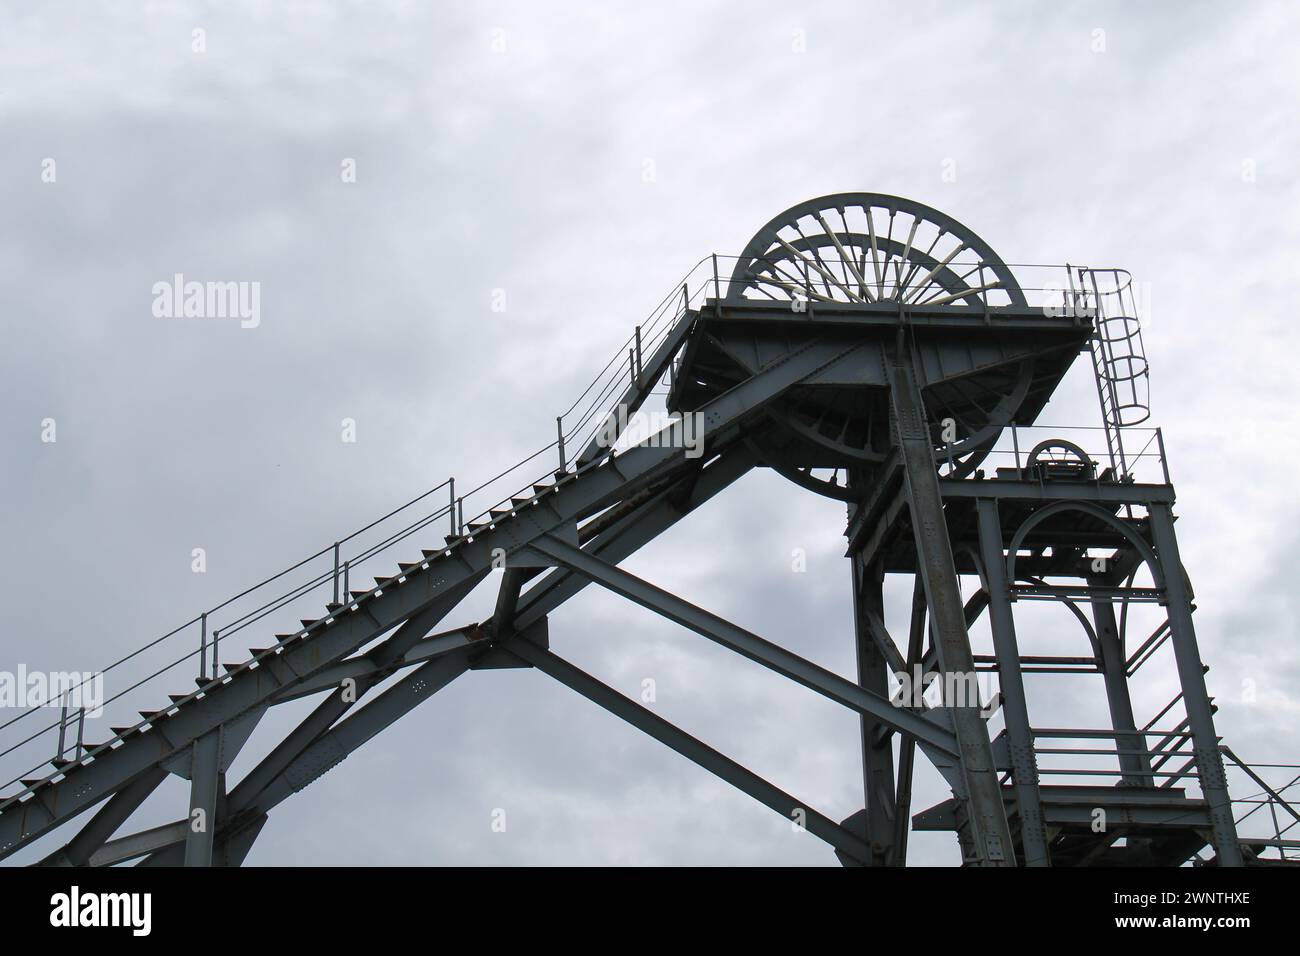 The Structure of a Disused Coal Mining Headstocks. Stock Photo